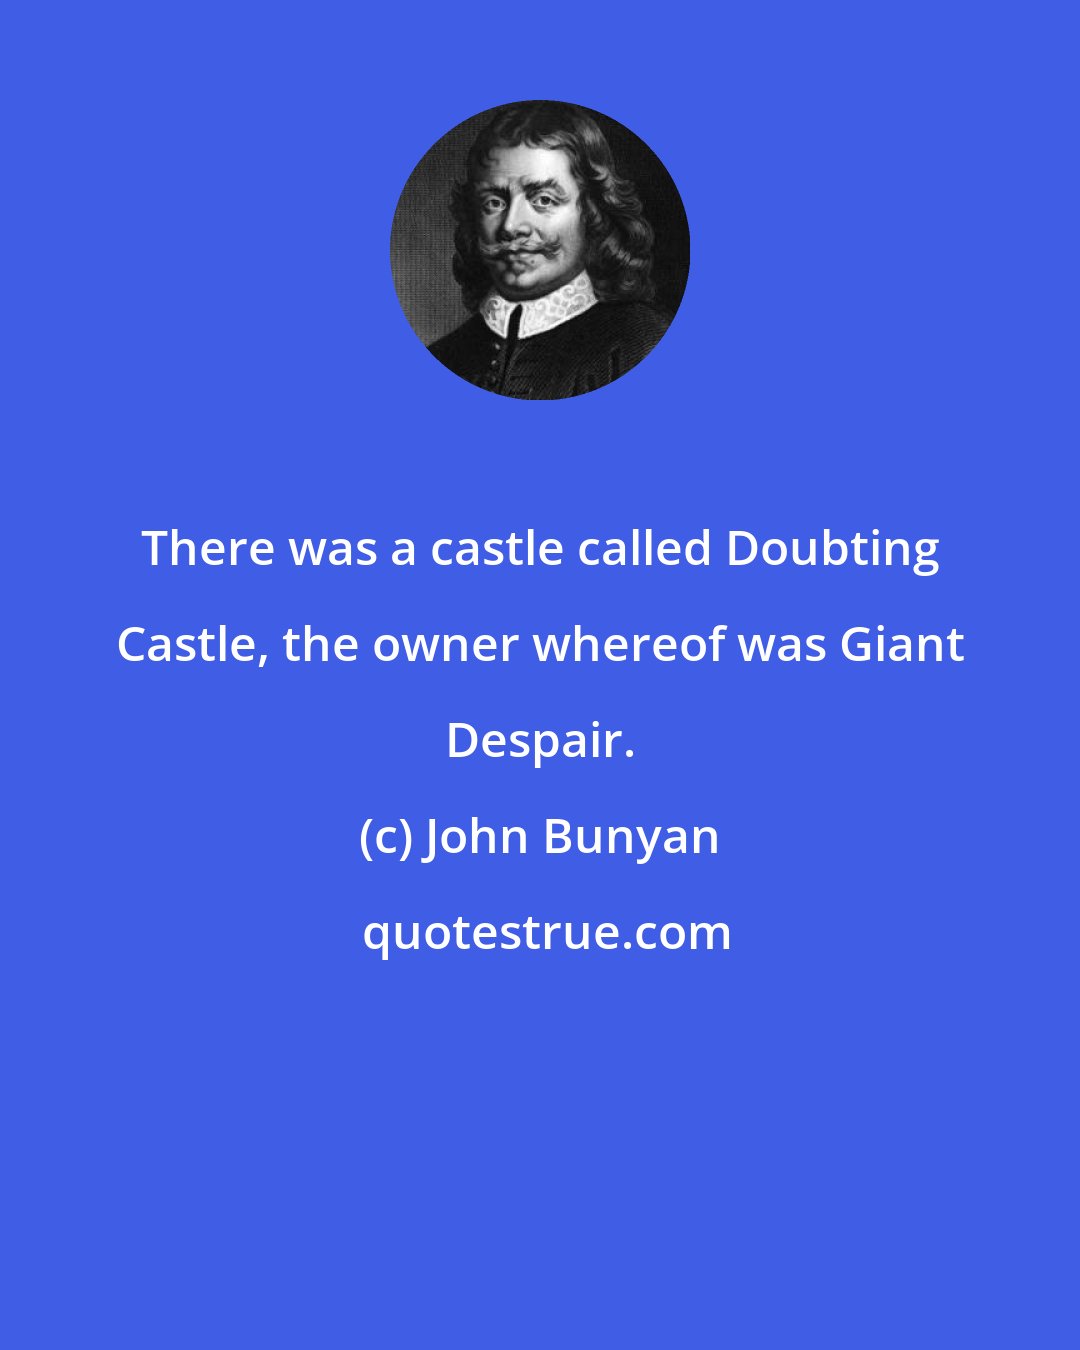 John Bunyan: There was a castle called Doubting Castle, the owner whereof was Giant Despair.